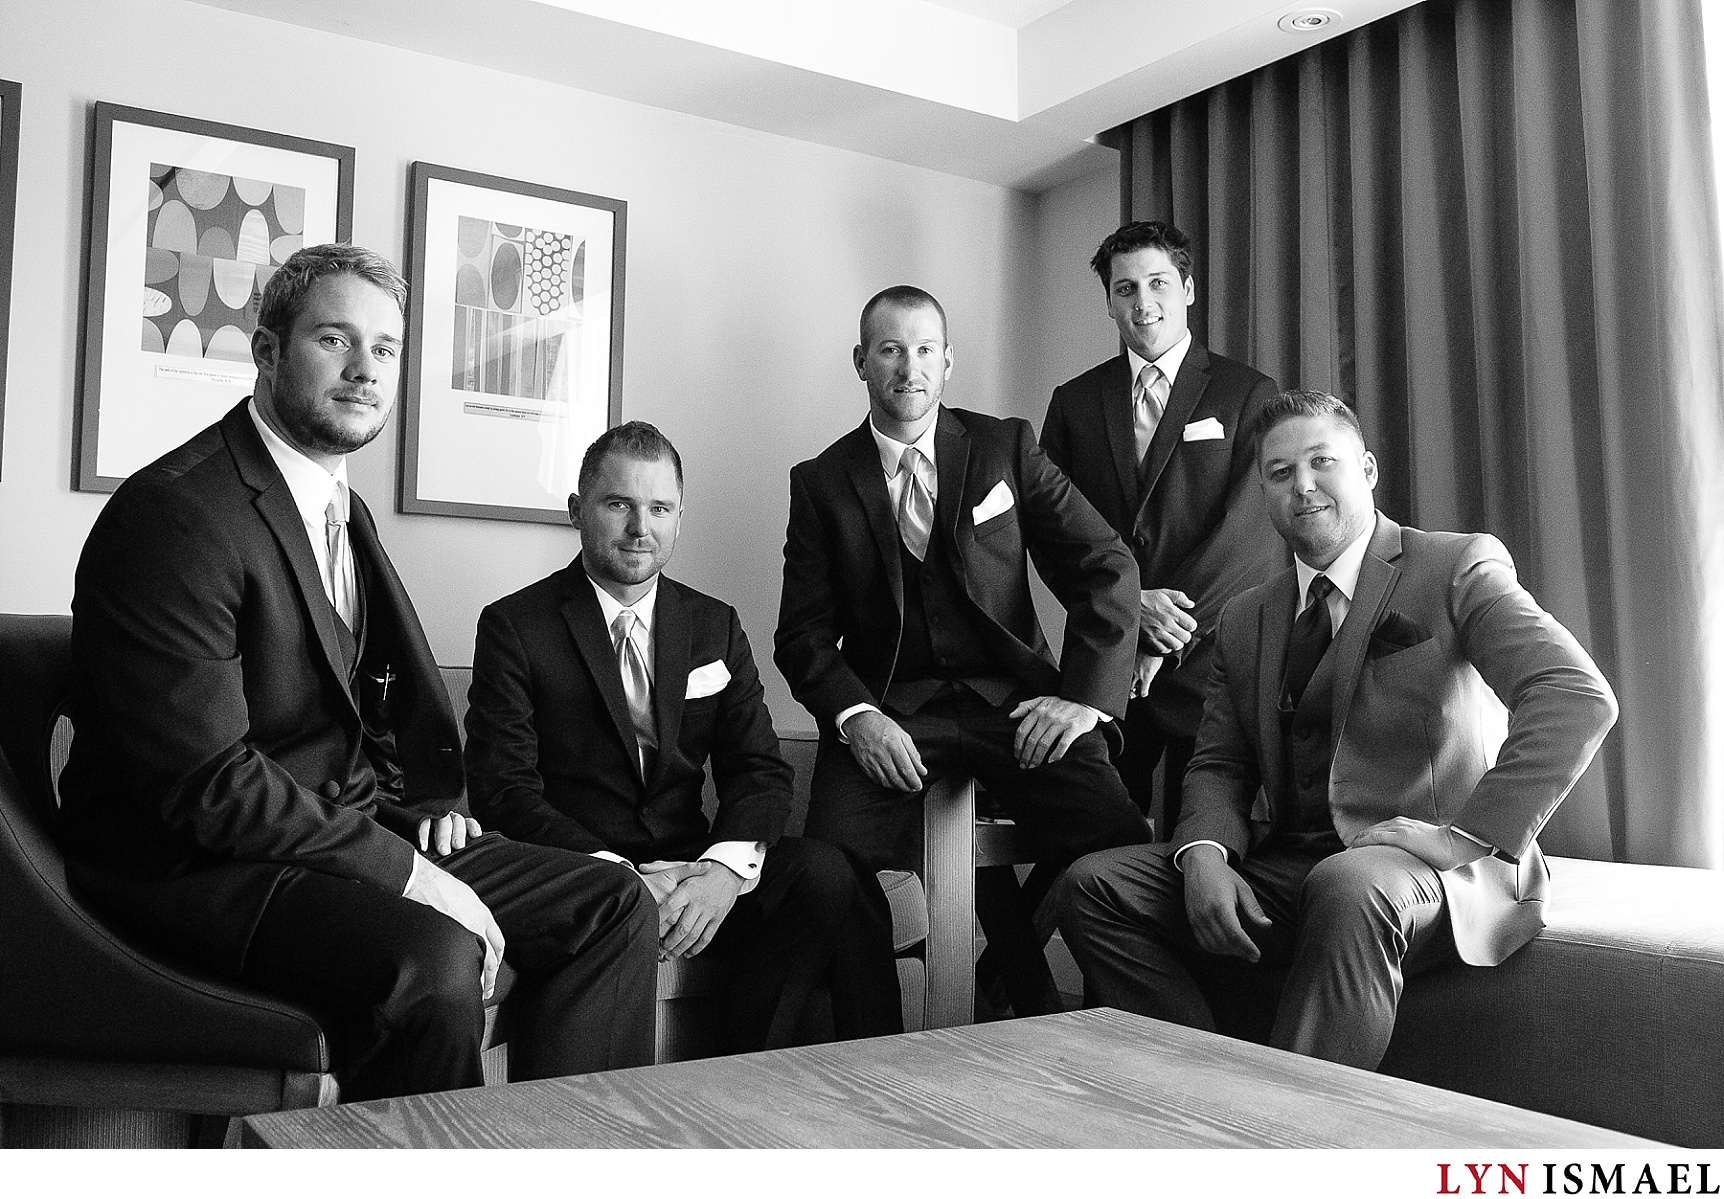 Black and white portrait of the groom and his groomsmen